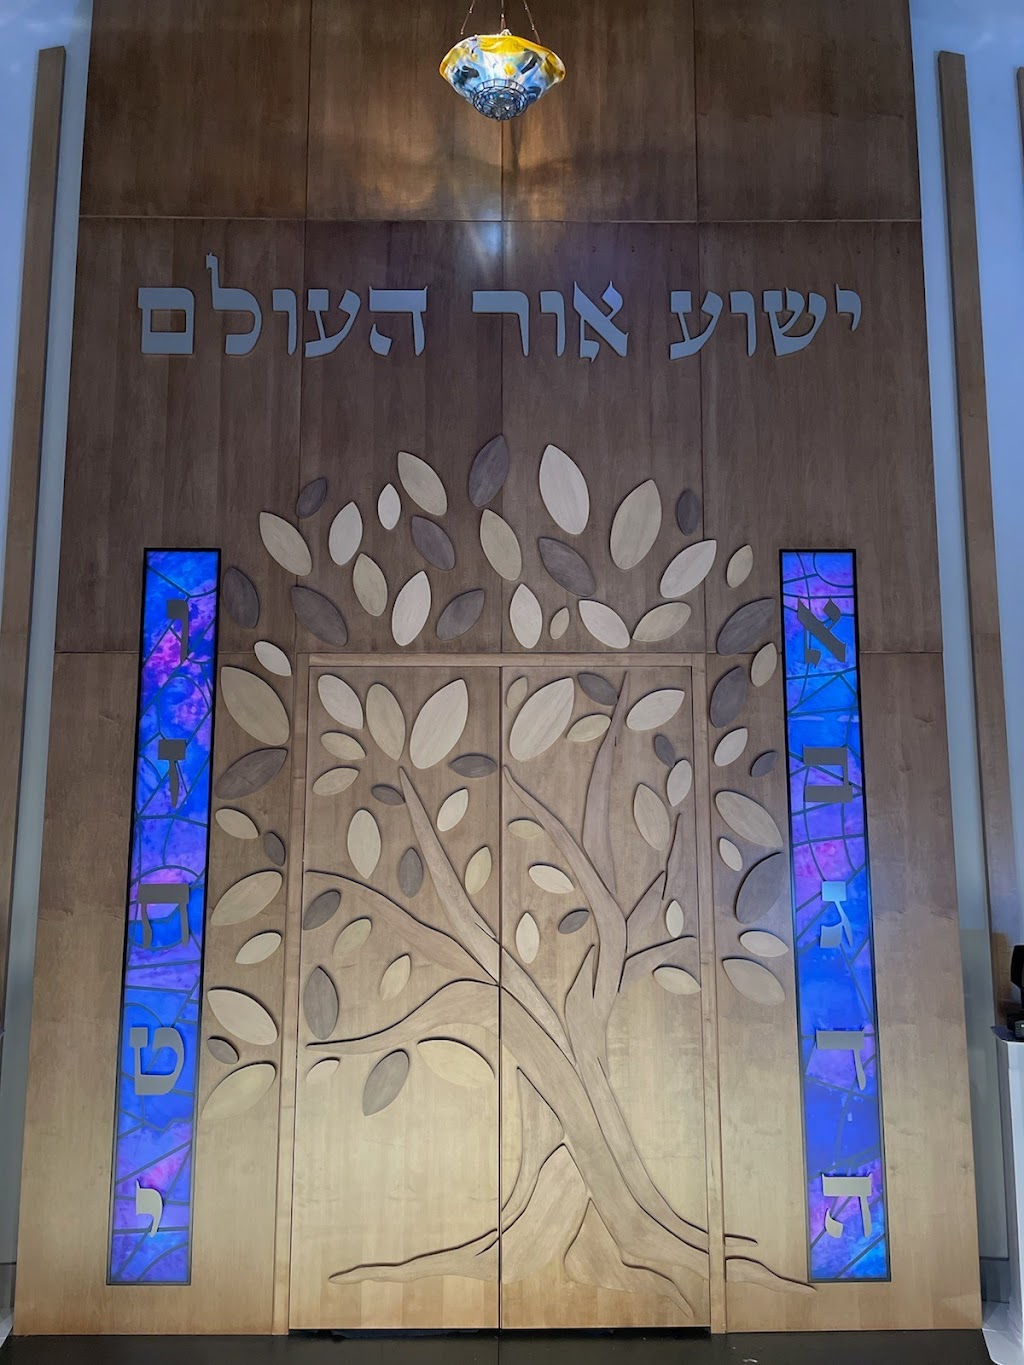 Congregation Beth Yeshua | 28 S New Middletown Rd, Media, PA 19063 | Phone: (215) 477-2706